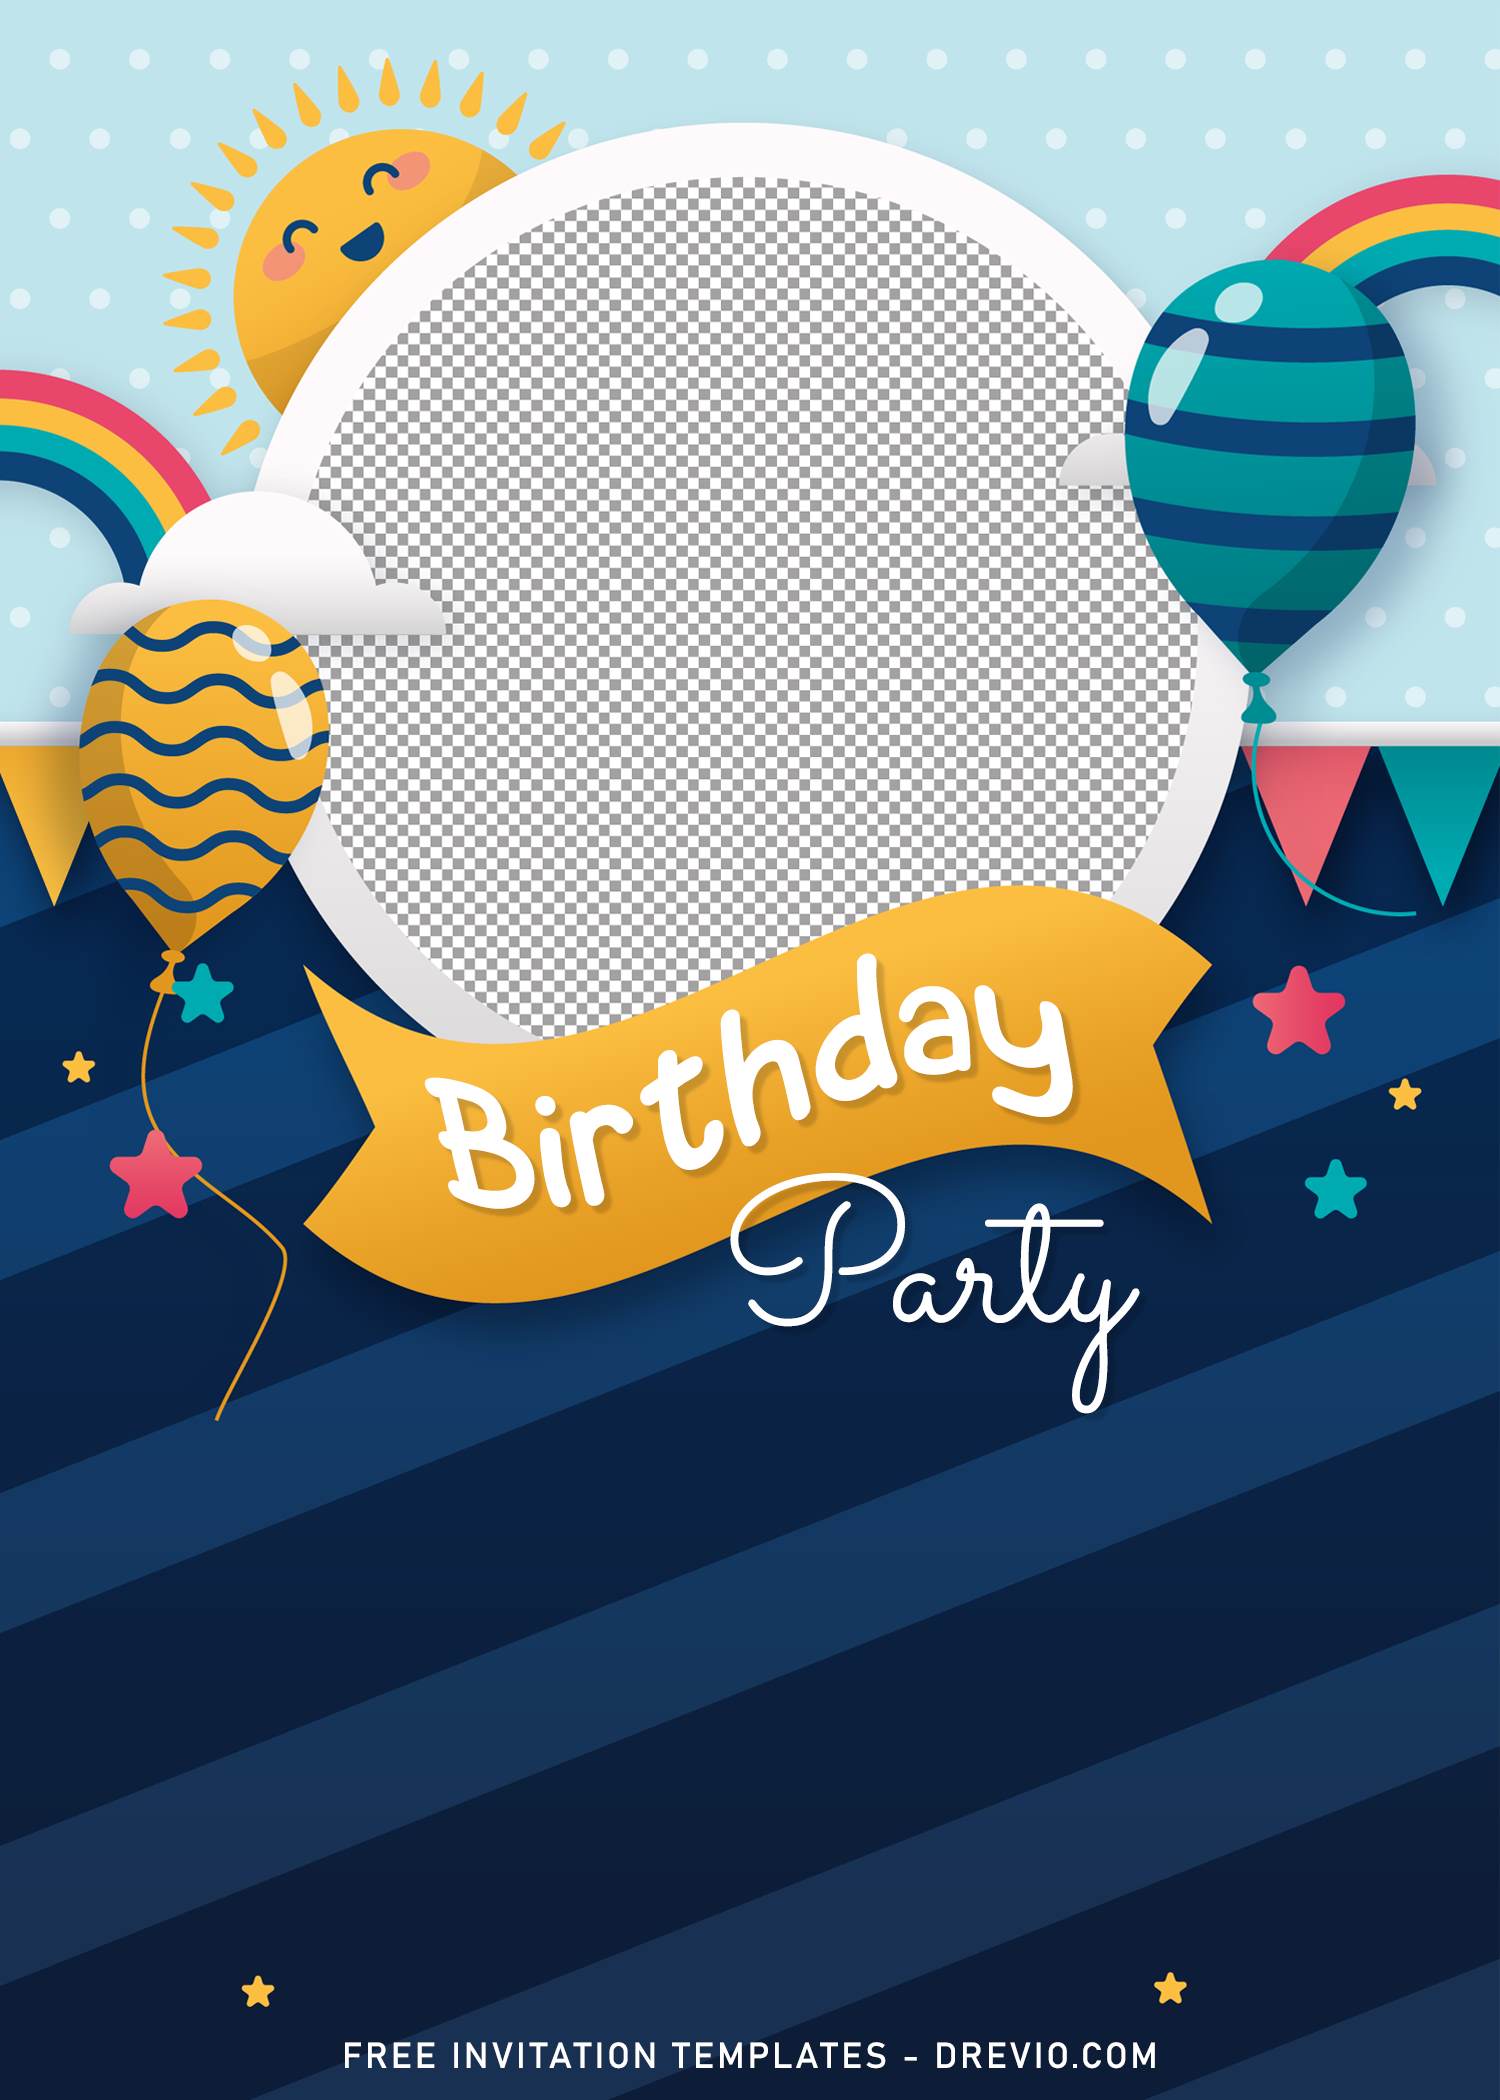 8-personalized-kids-birthday-party-invitation-templates-for-any-ages-download-hundreds-free